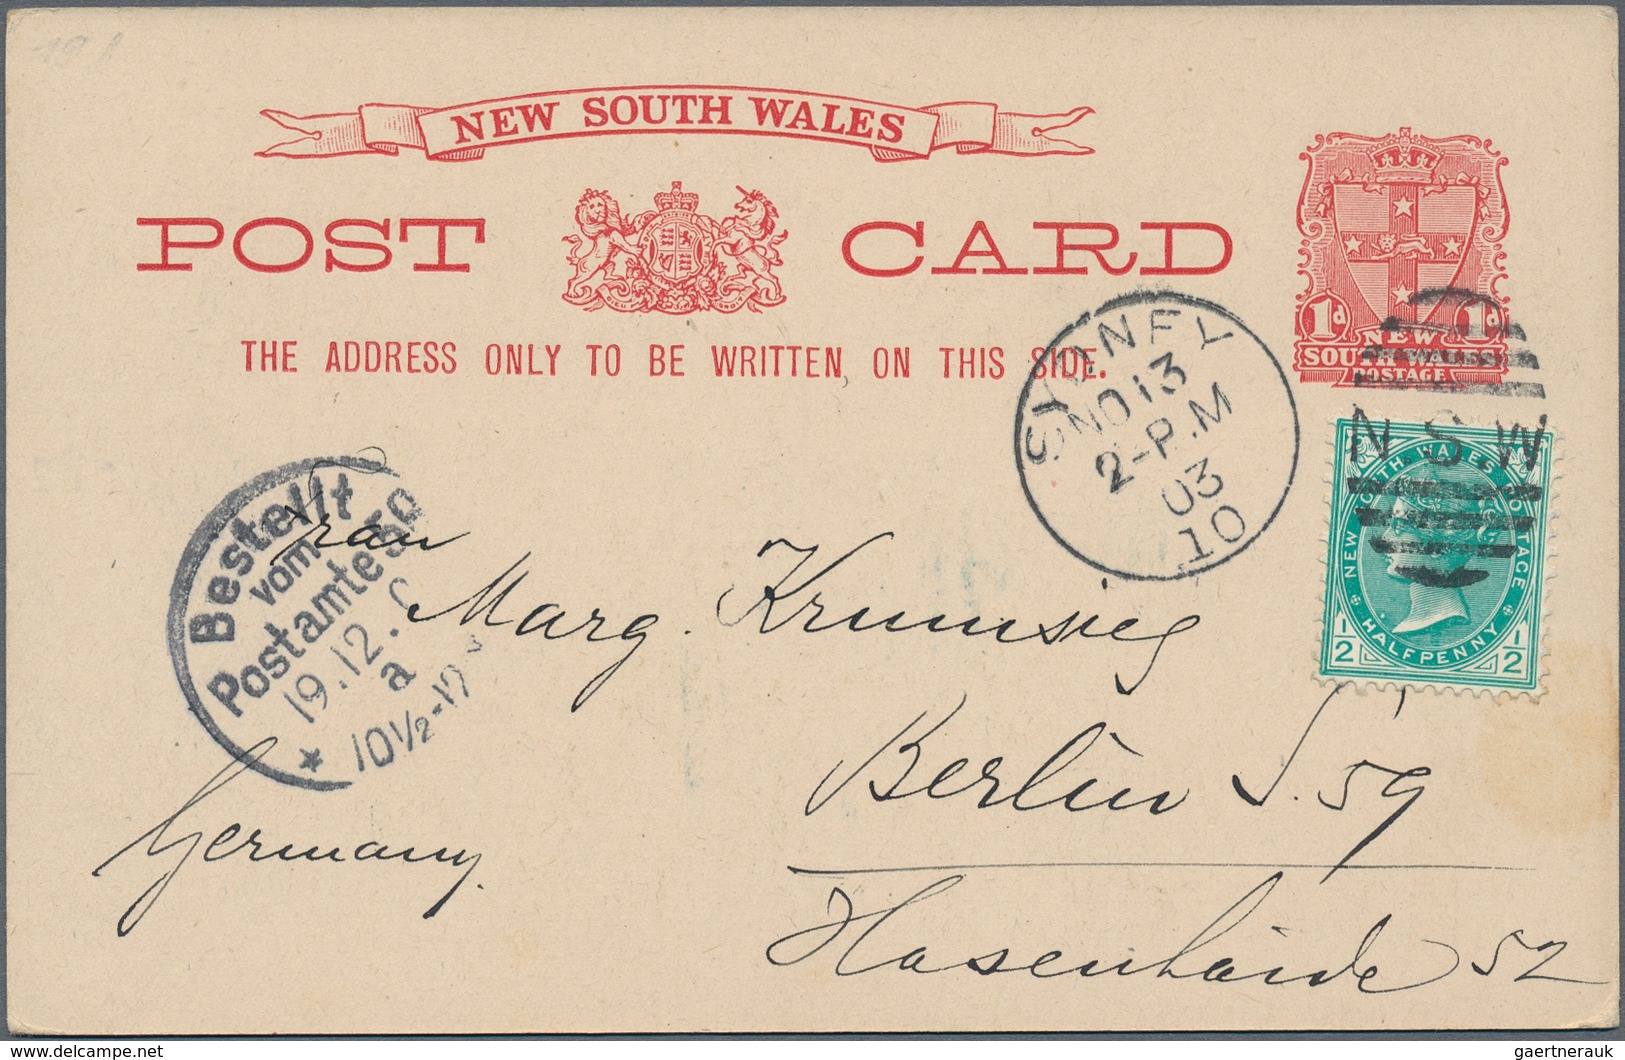 Neusüdwales: 1899/1906, five pictorial stat. postcards Coat of arms 1d. red with pictures on reverse